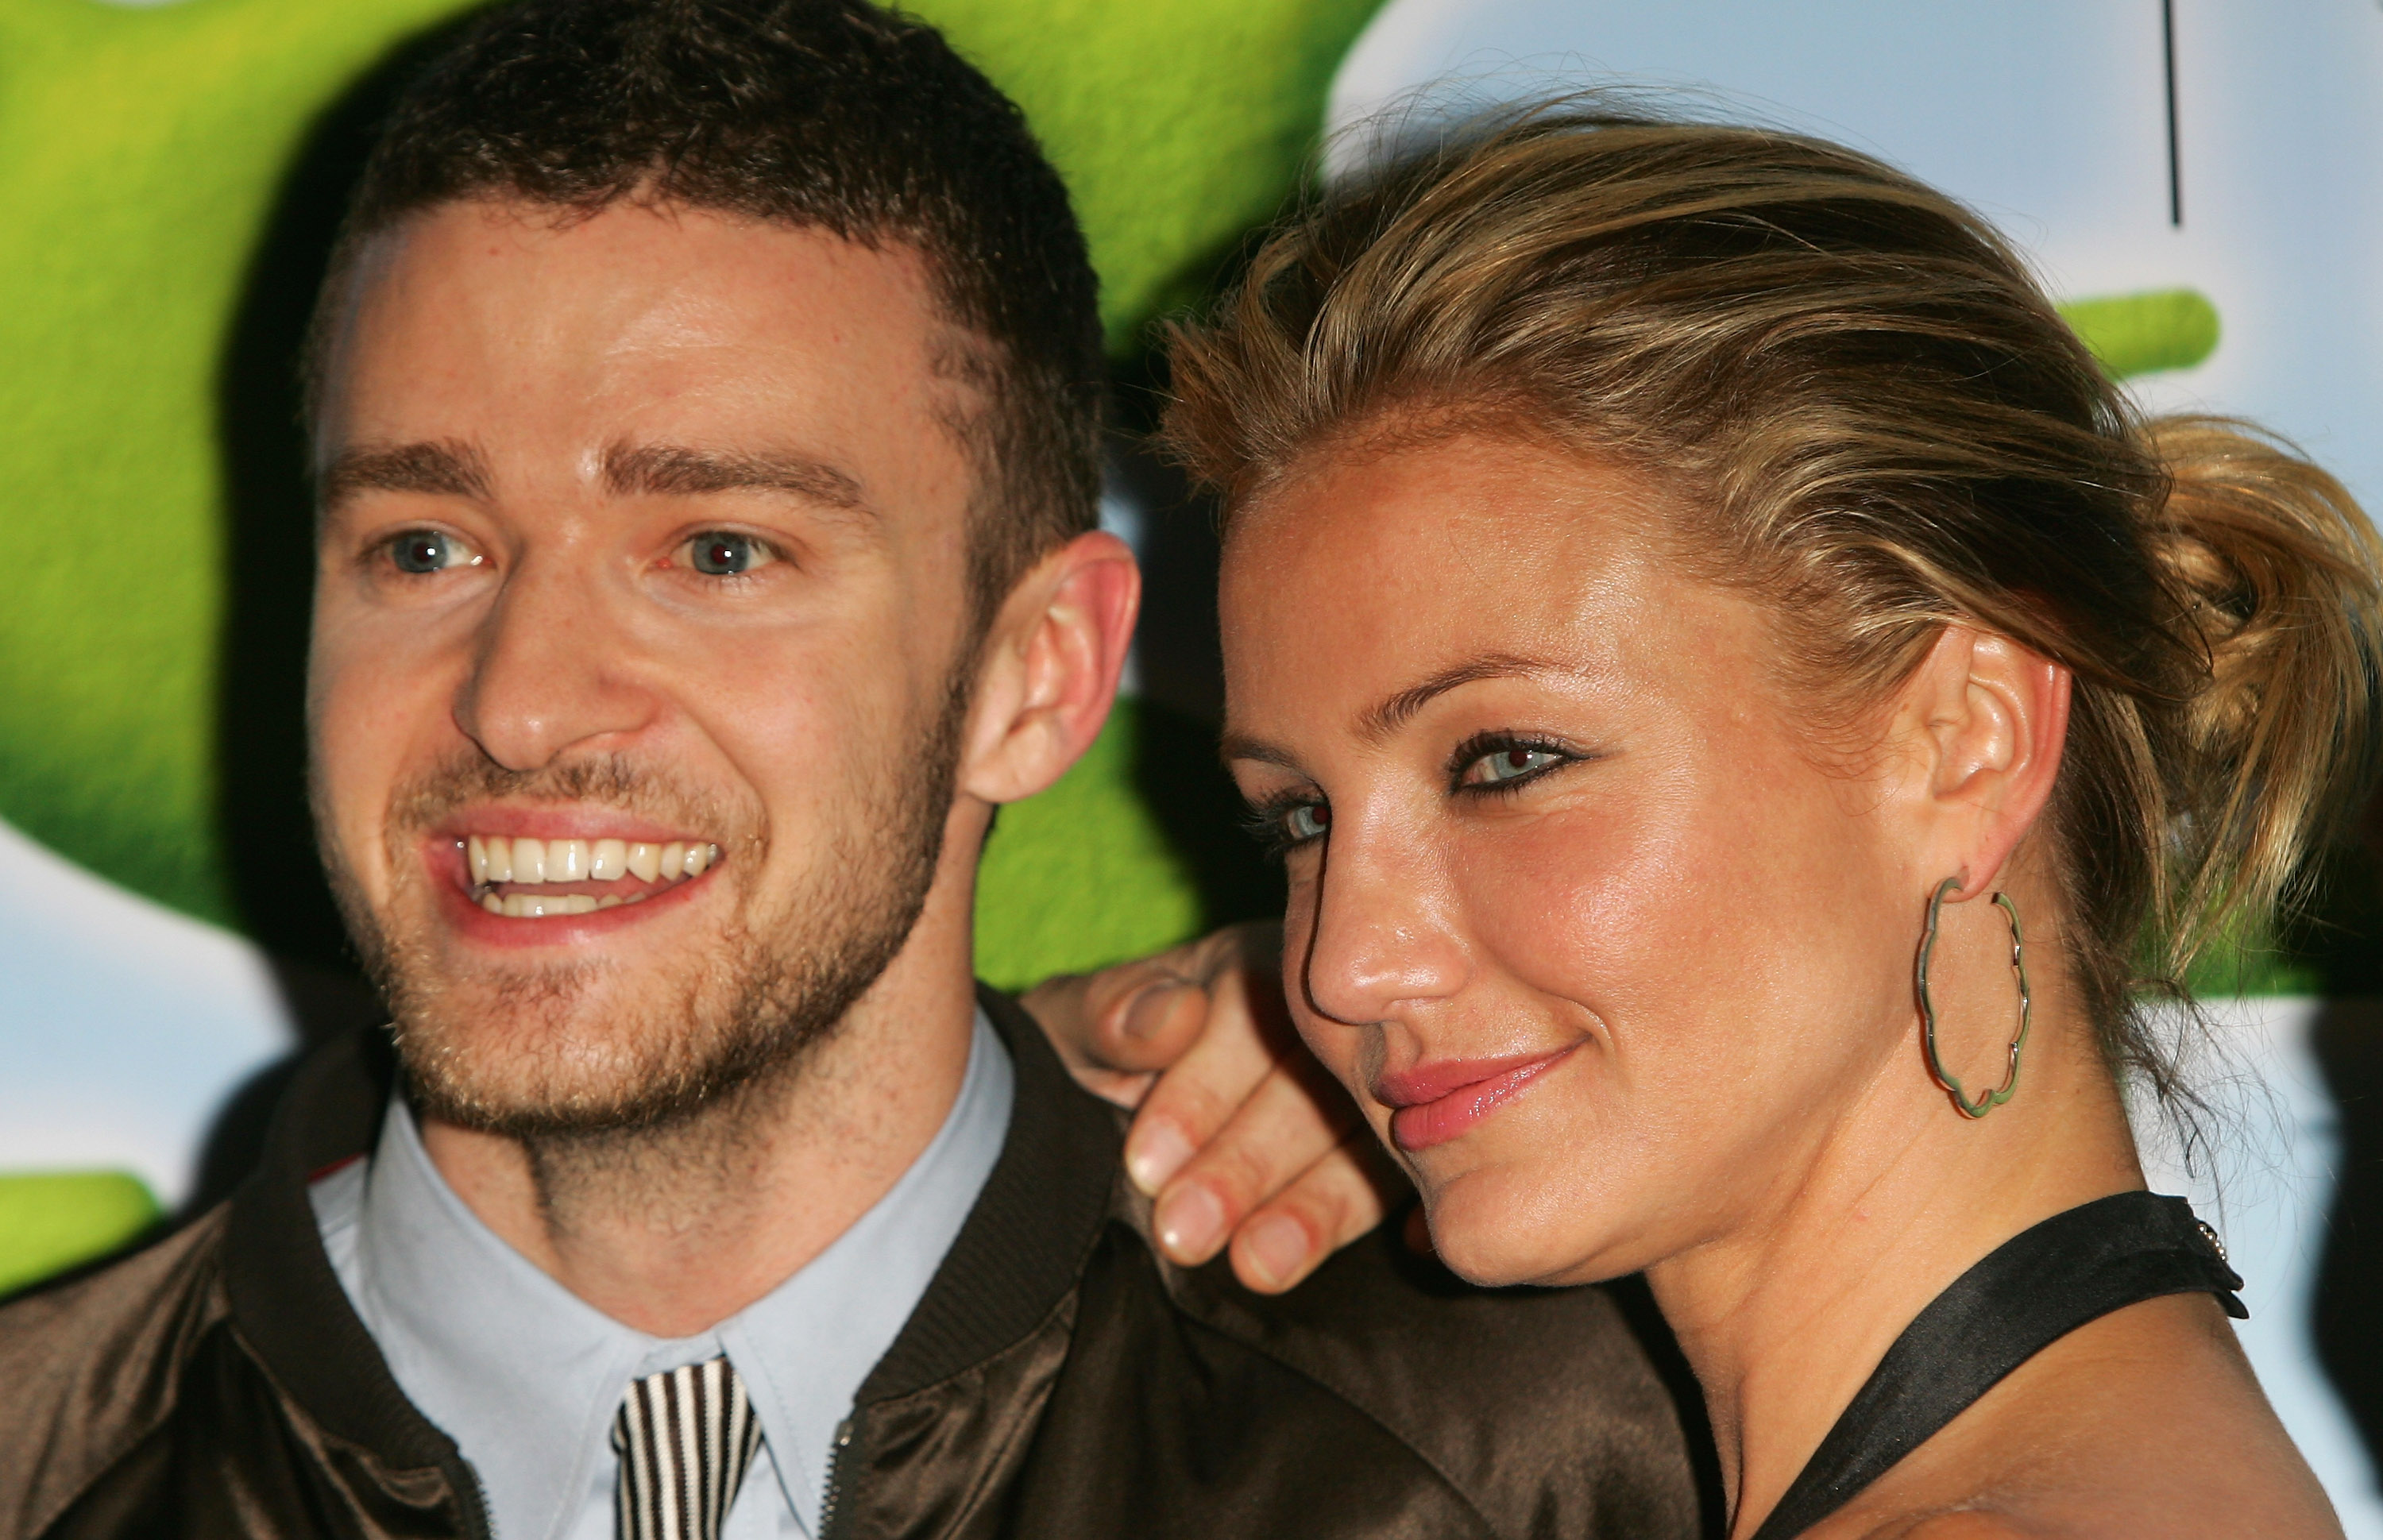 Justin Timberlake and Cameron Diaz at the premiere of "Shrek The Third" in London, England on June 11, 2007 | Source: Getty Images